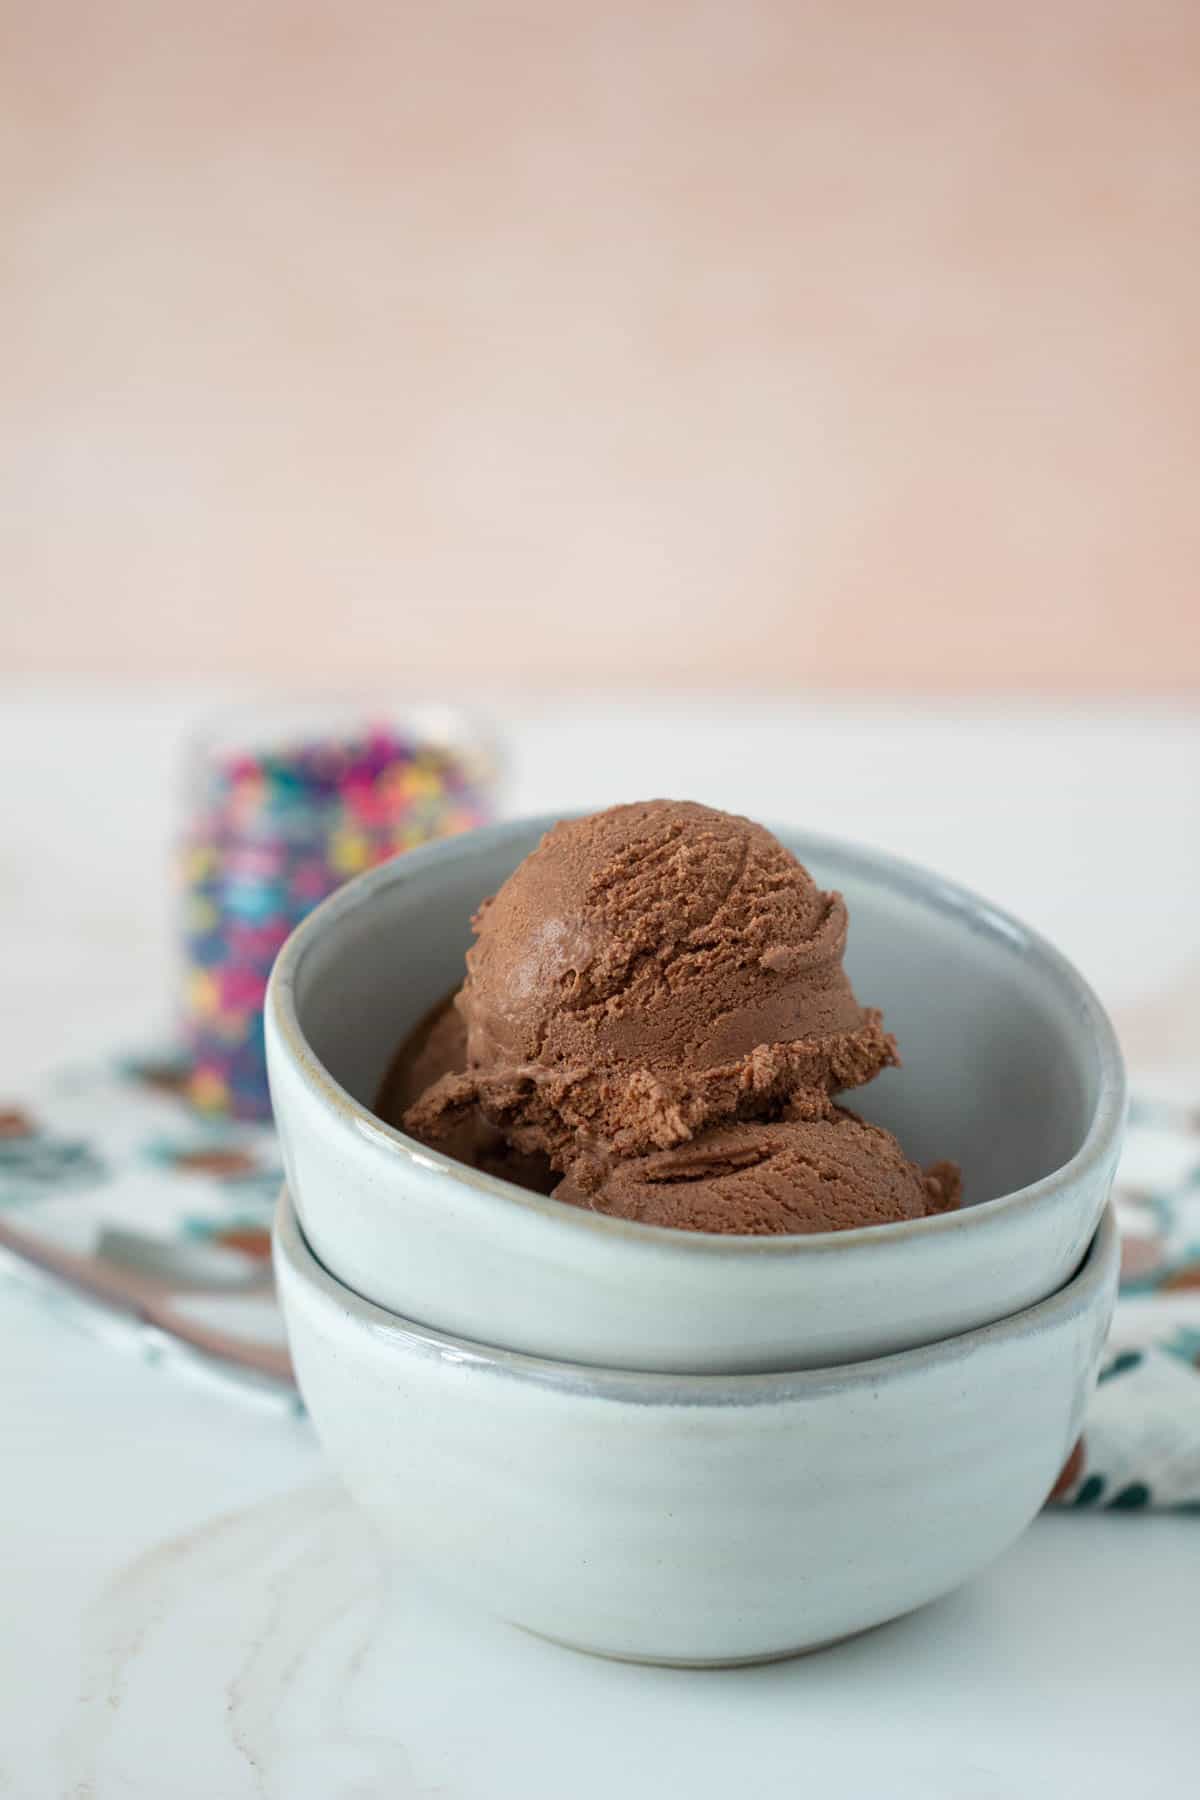 stacked bowls with chocolate ice cream in top bowl